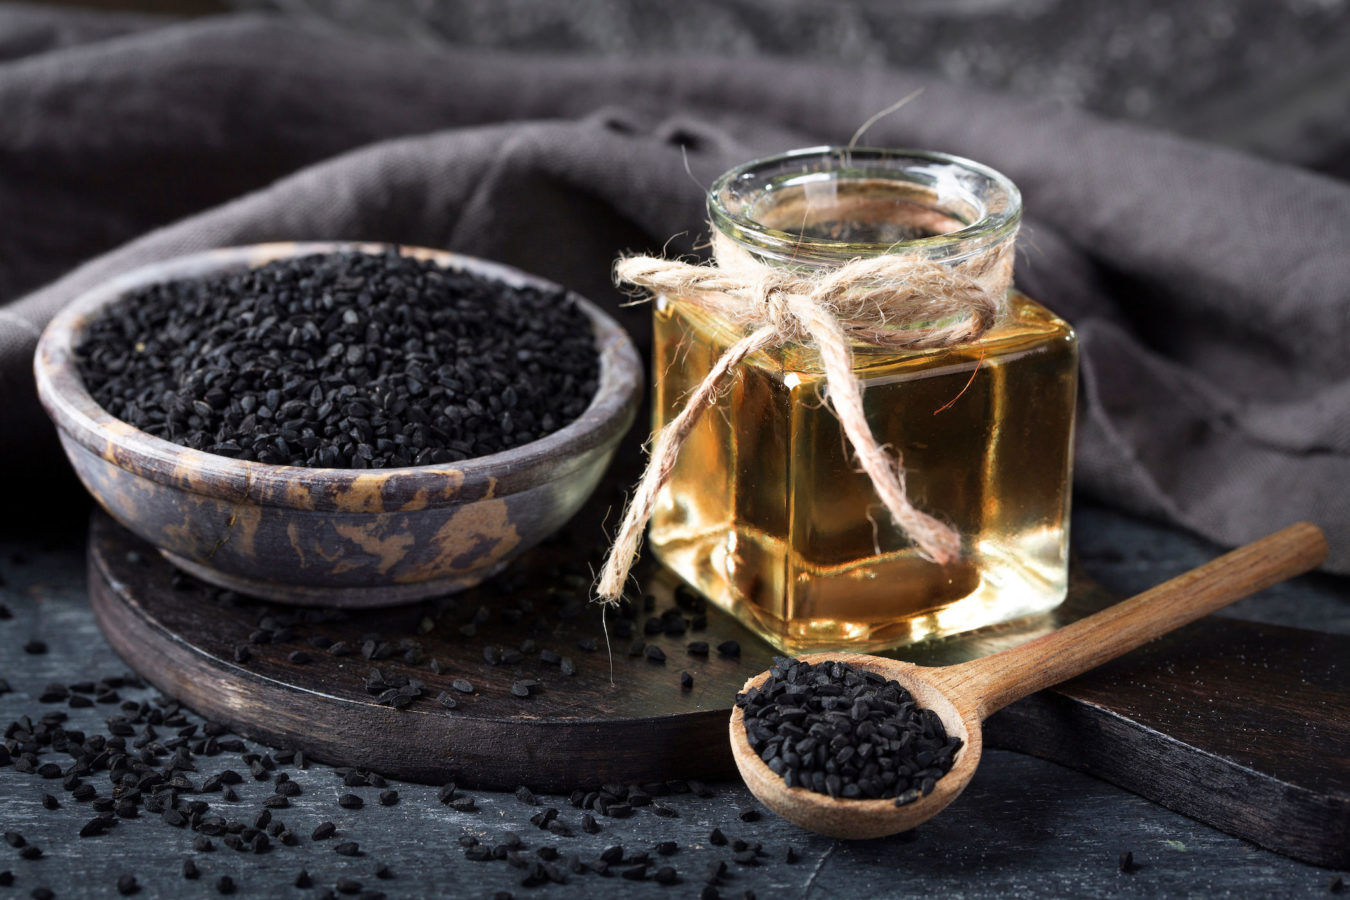 Black seed oil may be the answer to all your skin and hair woes